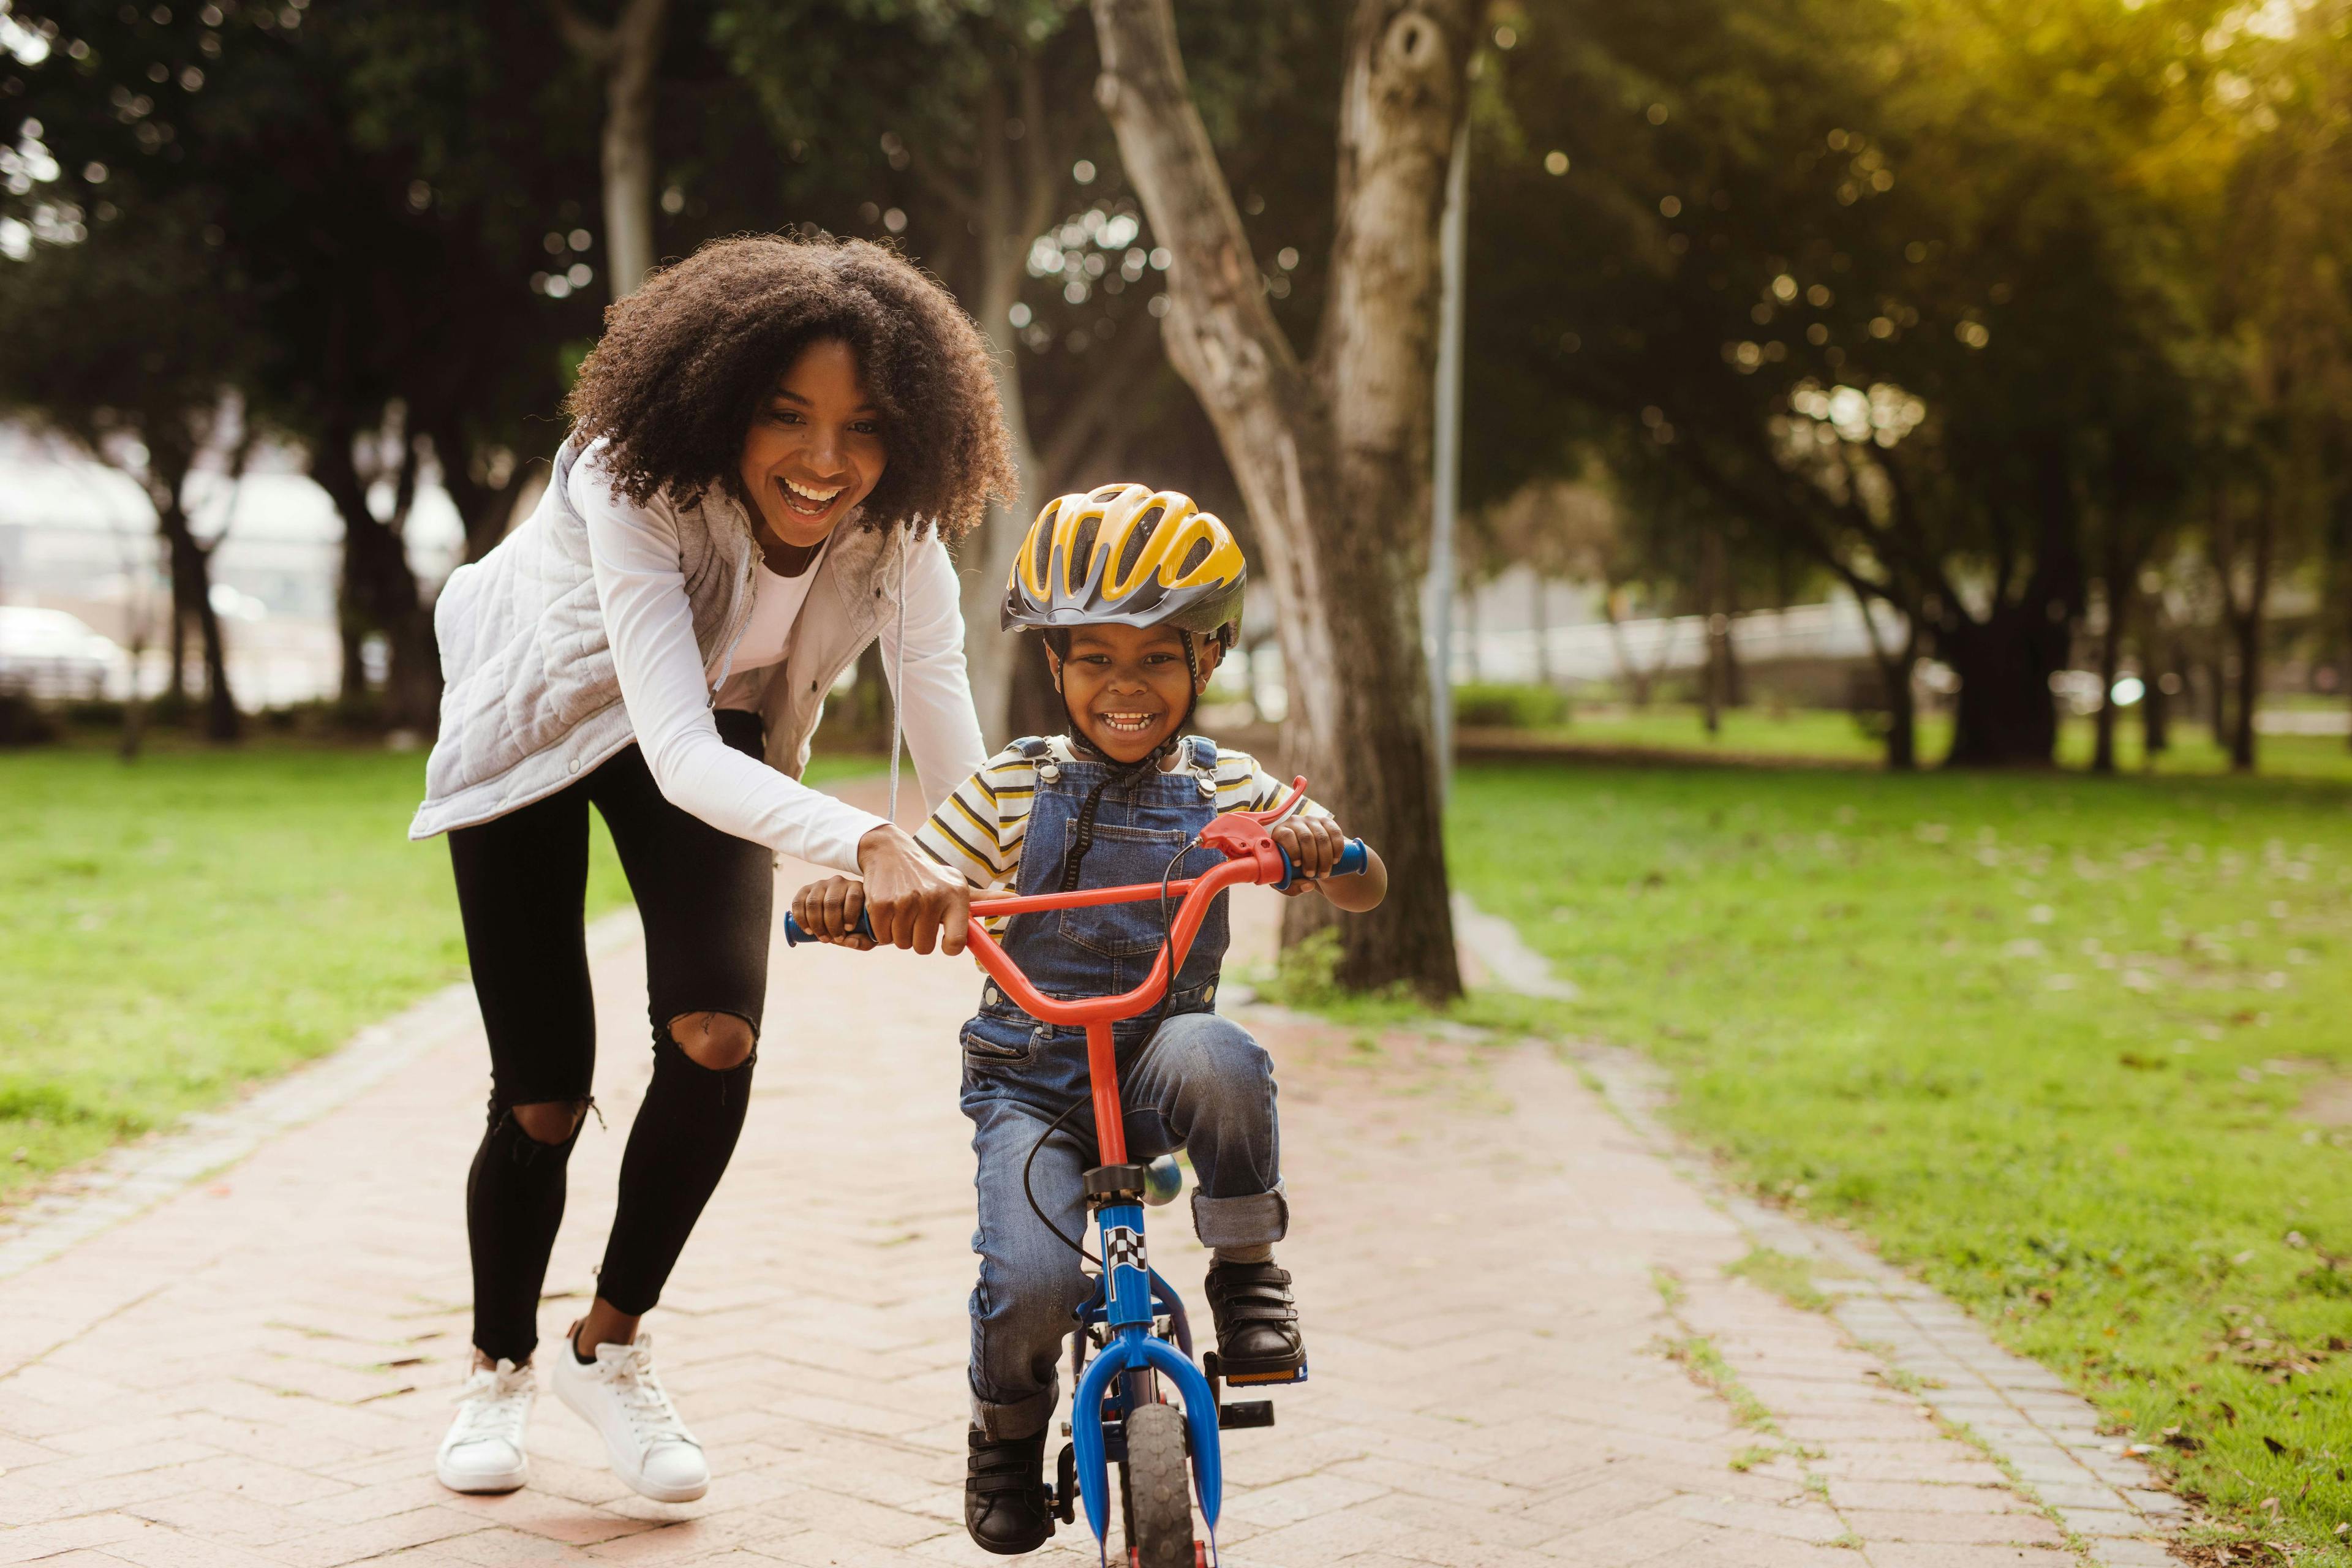 Black single mom smiling, while helping son ride a bike